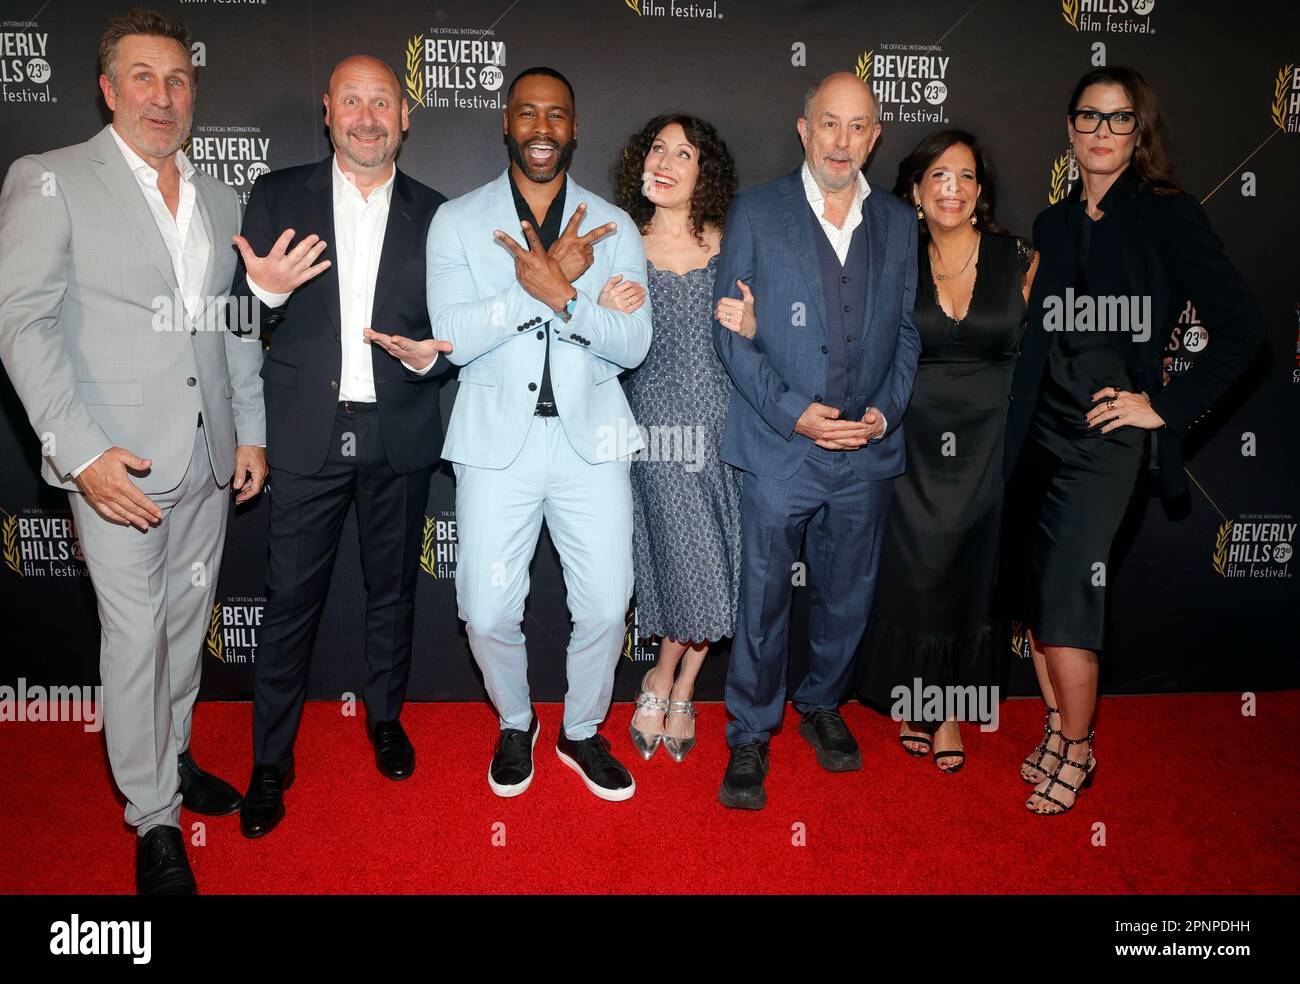 Hollywood, Ca. 19th Apr, 2023. David Kelsey, Steven Paul, Justin Marcel McManus, Lisa Edelstein, Richard Schiff, Sue Zarco Kramer, Bridget Moynahan at the opening night of the 23rd International Beverly Hills Film Festival at TCL Chinese 6 Theatres in Hollywood California on April 18, 2023. Credit: Faye Sadou/Media Punch/Alamy Live News Stock Photo